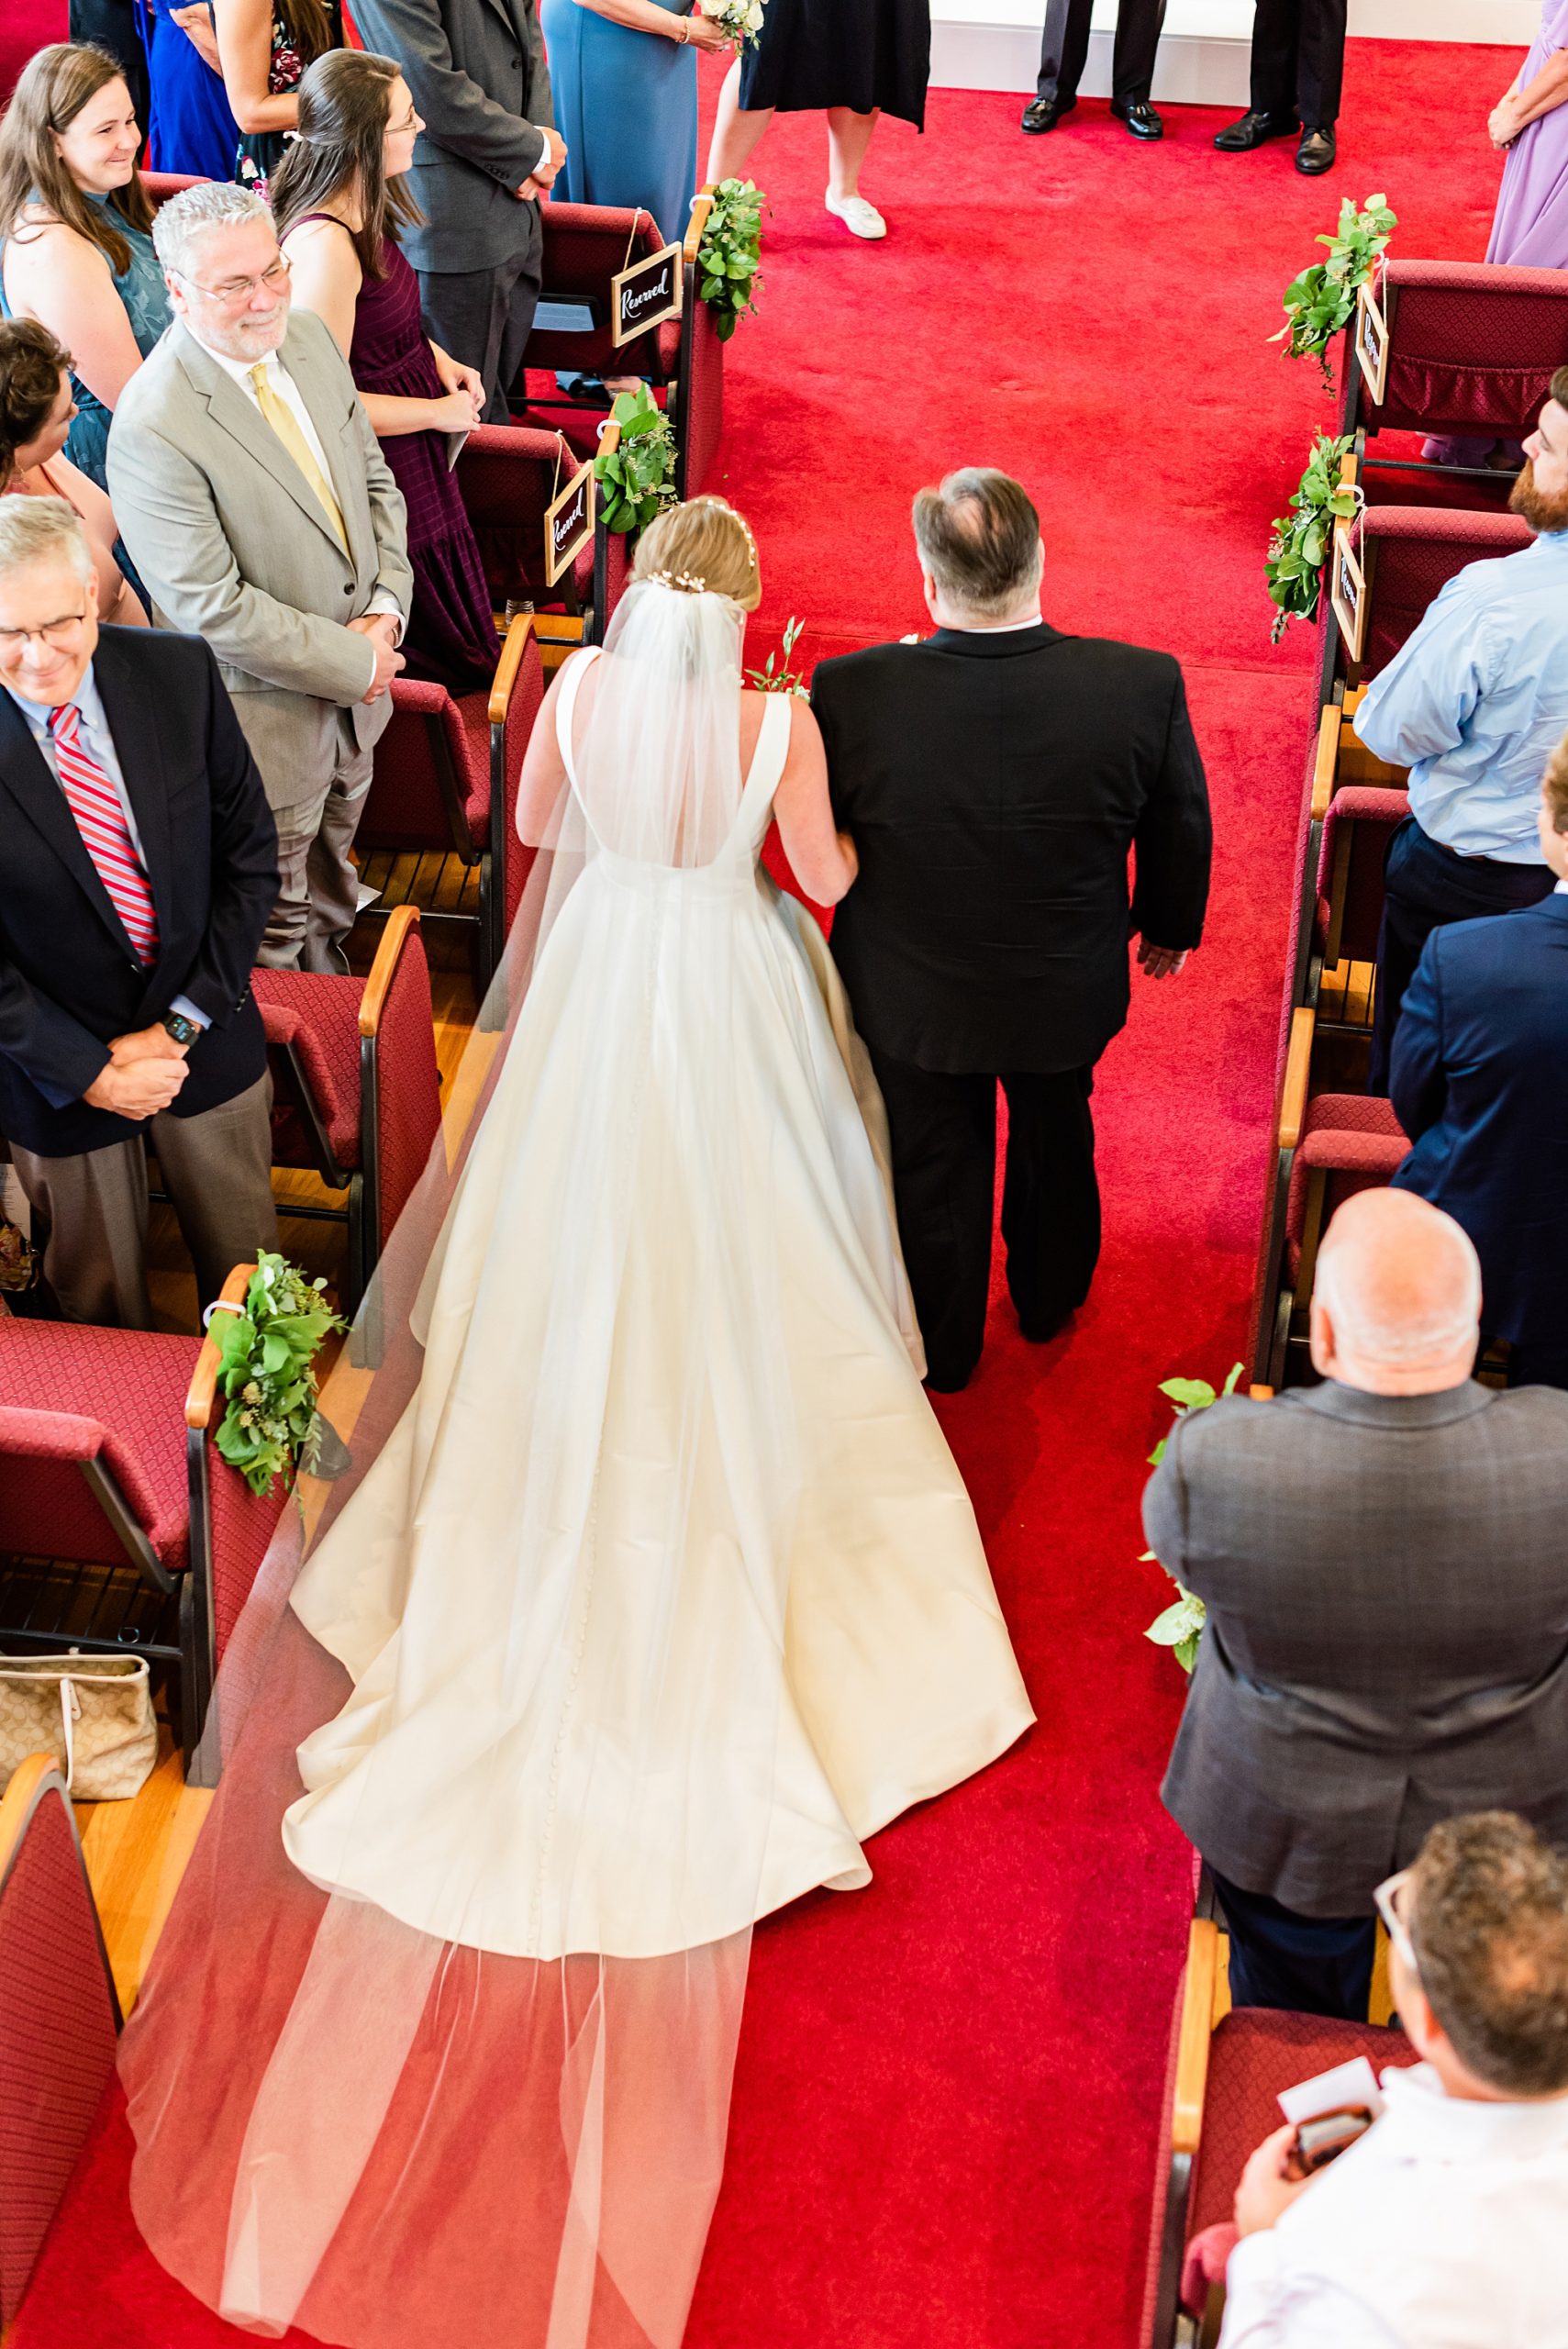 bride walks into wedding ceremony with father at church